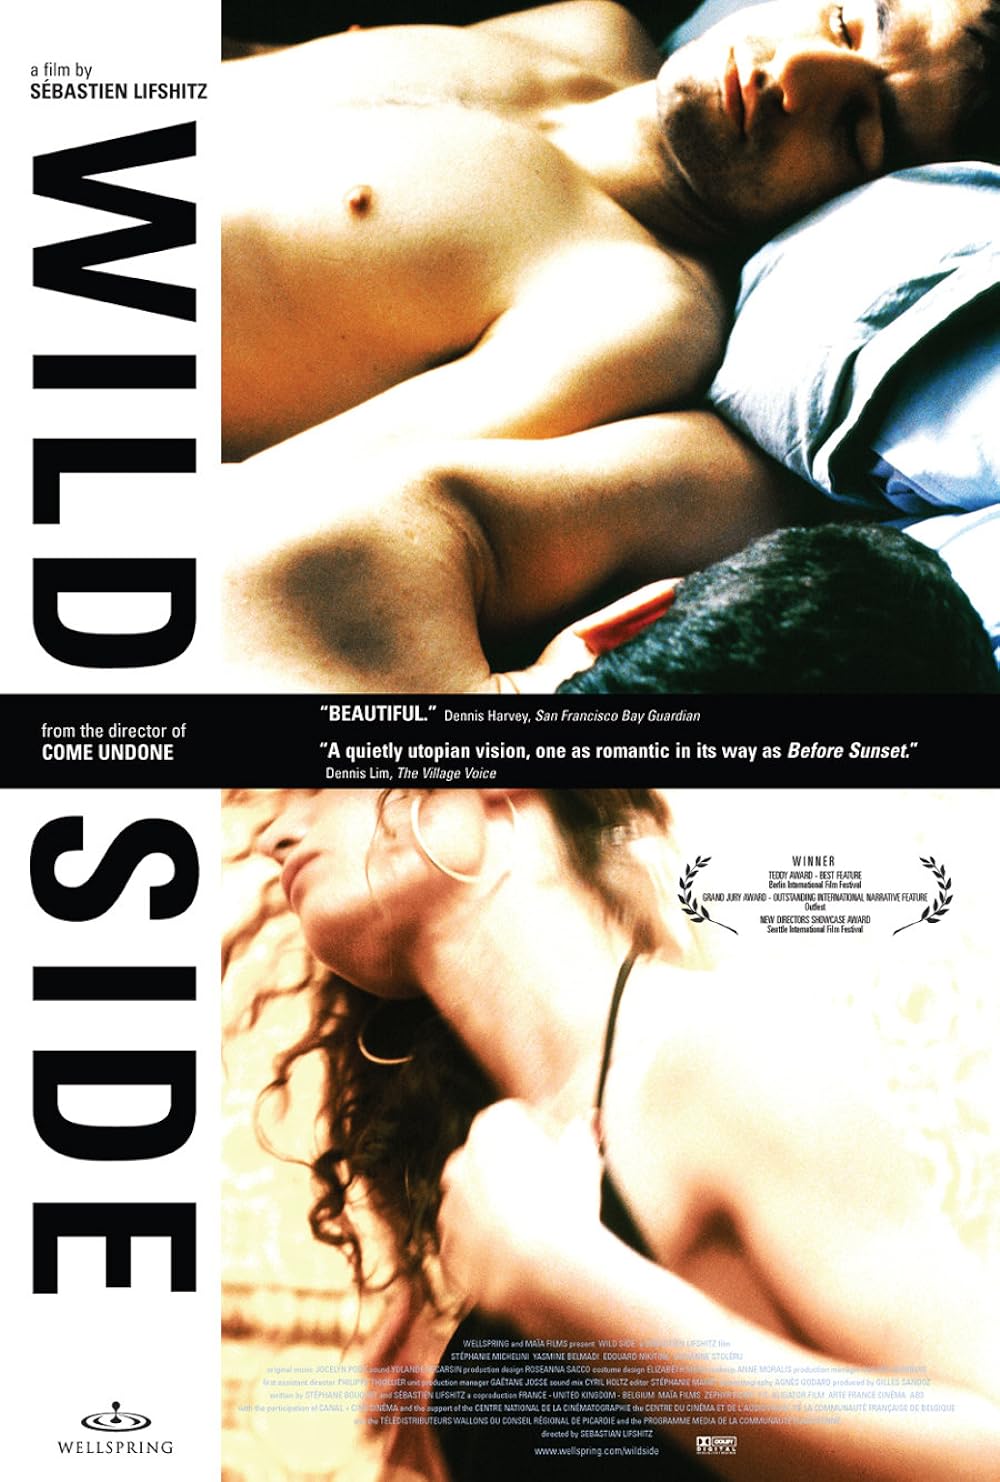 brittney gaskell recommends wild side full movie pic